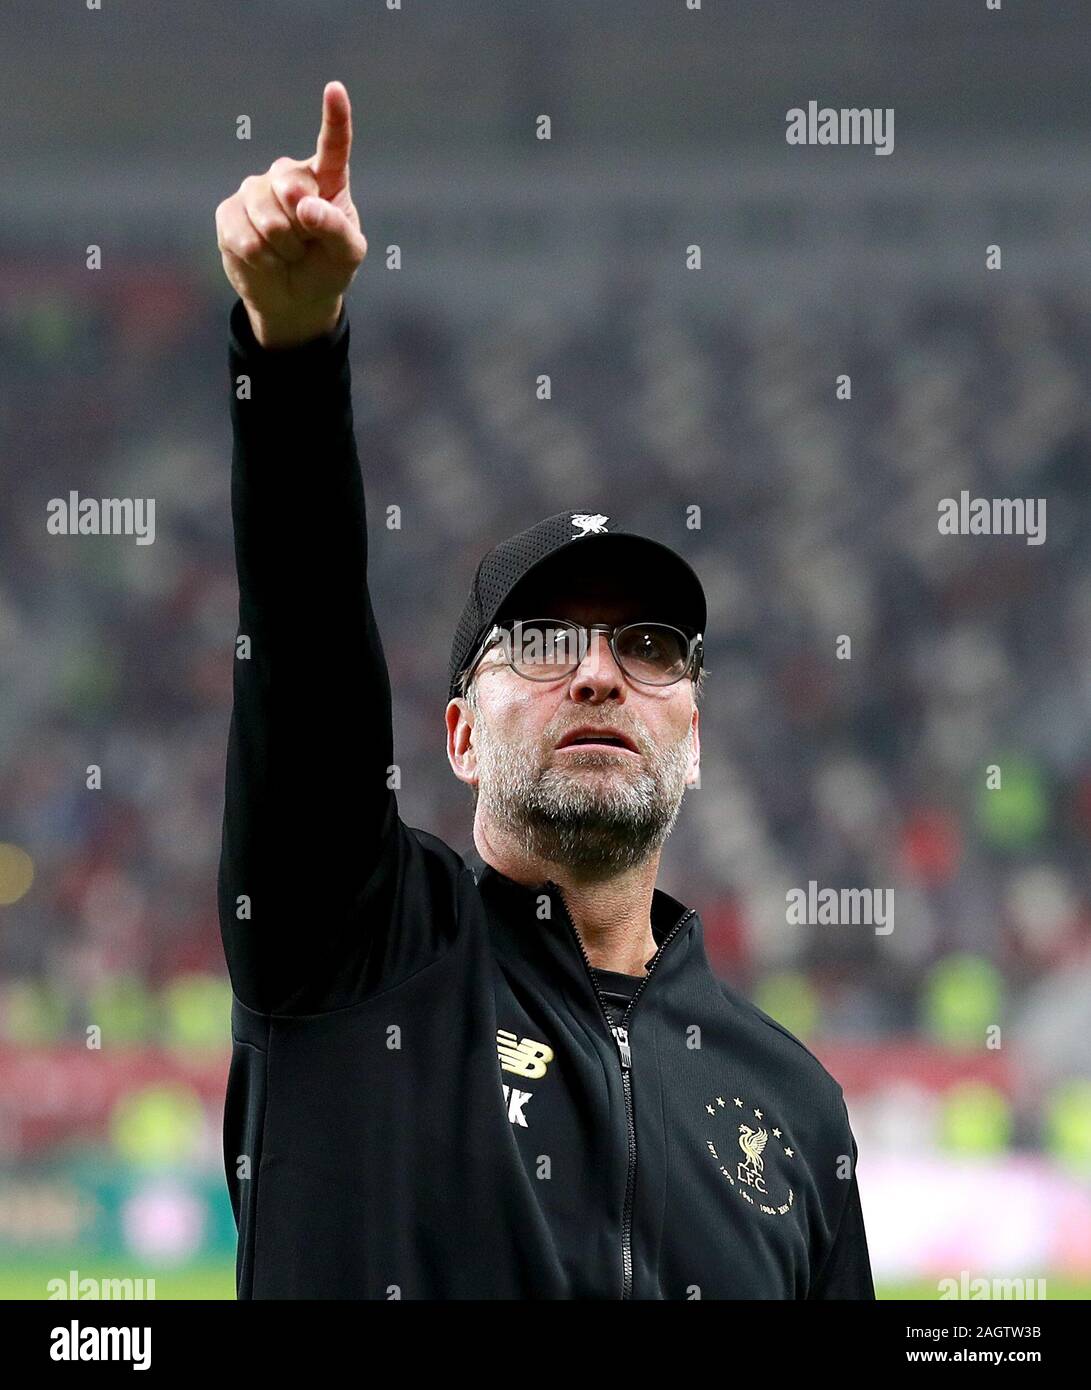 Liverpool manager Jurgen Klopp celebrates after the final whistle during the FIFA Club World Cup final at the Khalifa International Stadium, Doha. Stock Photo